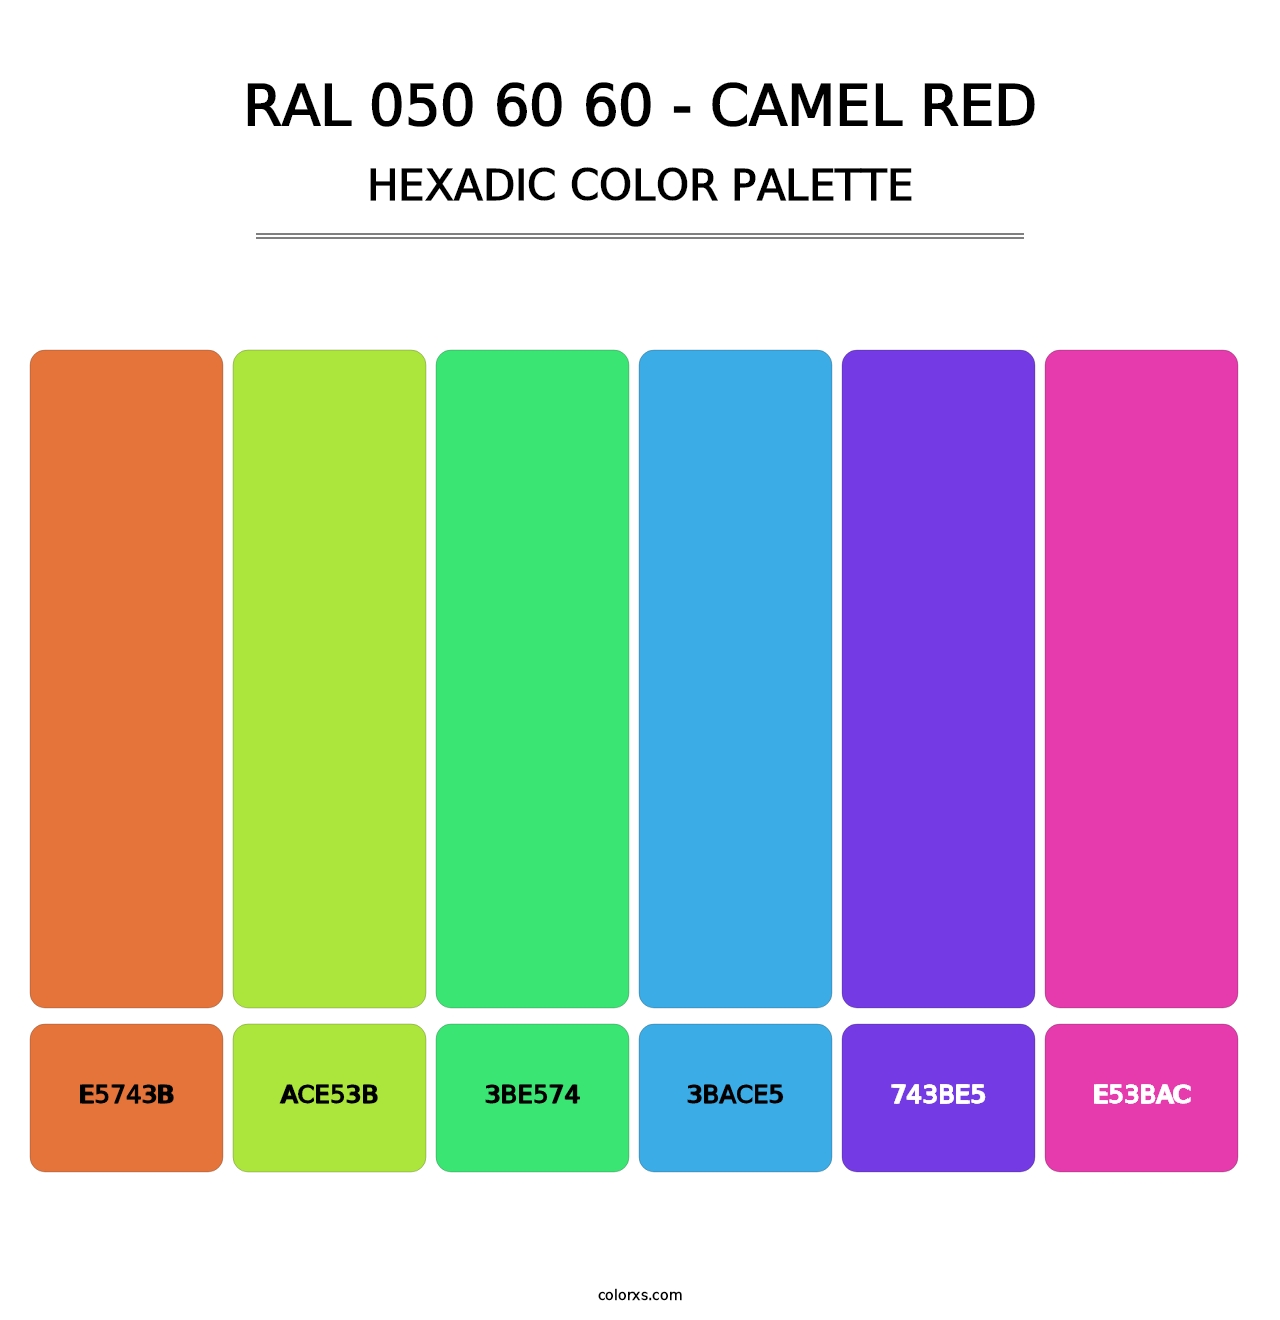 RAL 050 60 60 - Camel Red - Hexadic Color Palette